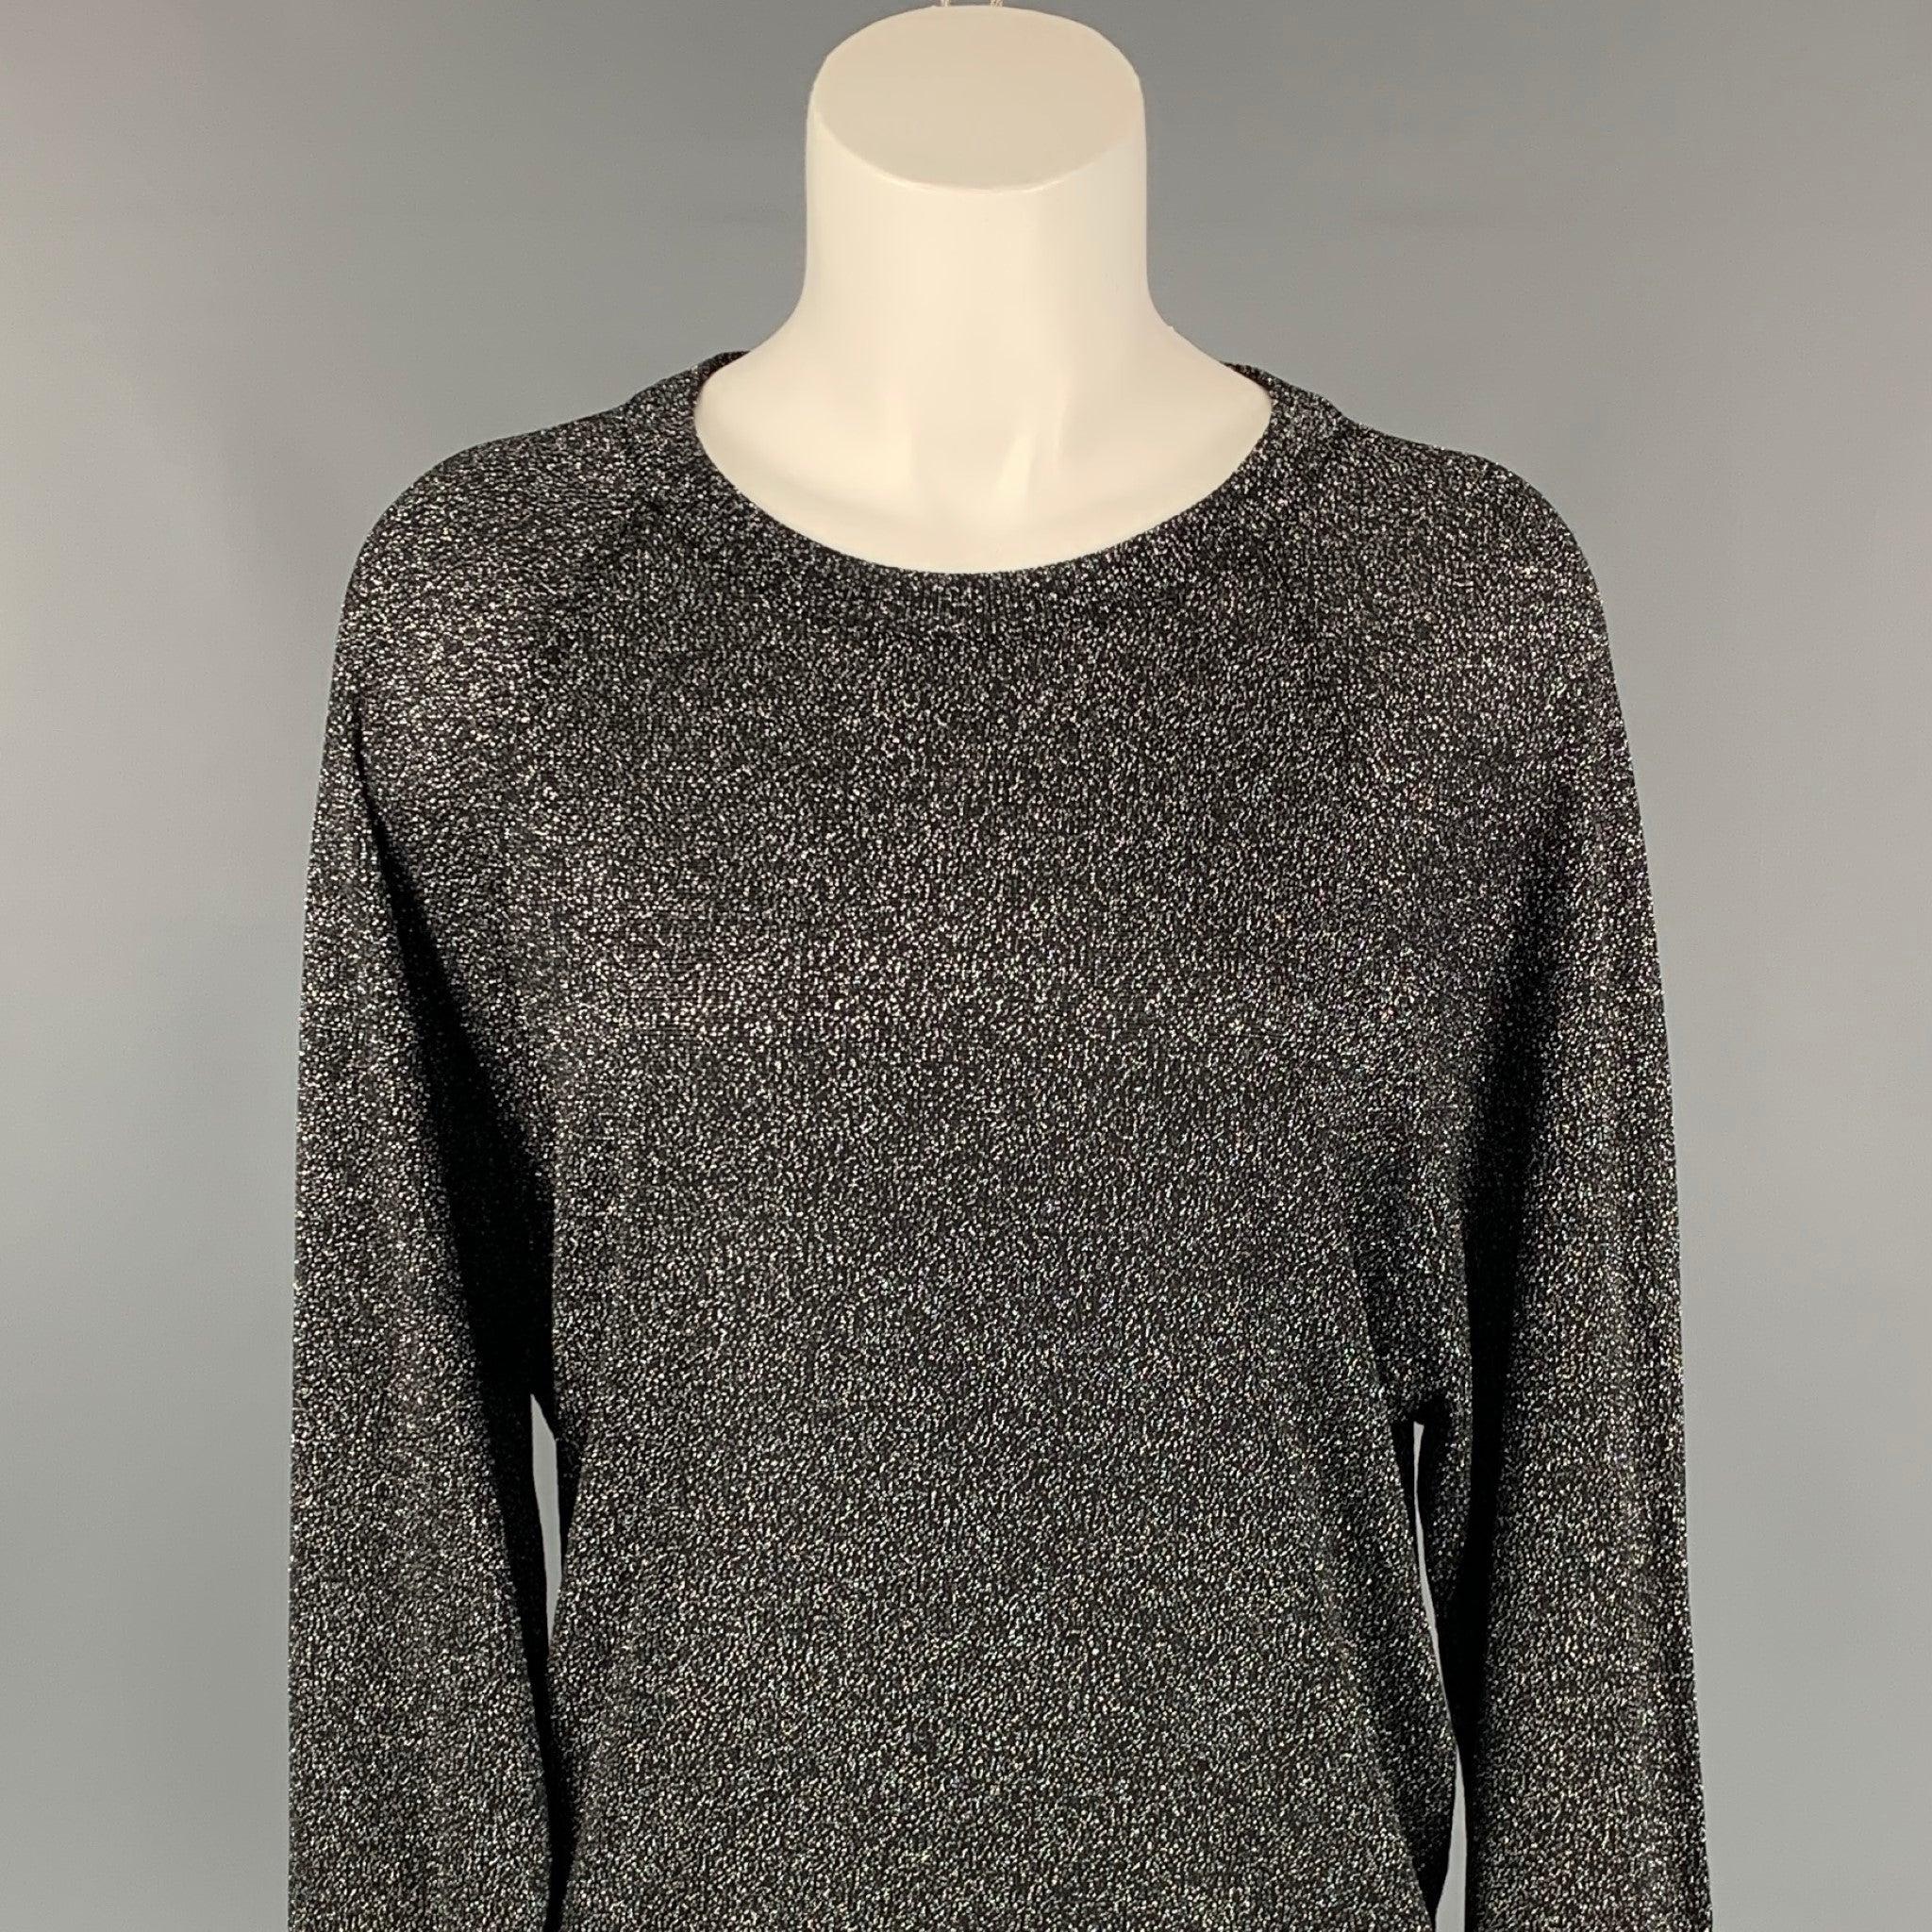 MICHAEL KORS COLLECTION pullover comes in a black & silver metallic acetate blend featuring a loose fit and a crew-neck.
Very Good
Pre-Owned Condition. 

Marked:   XS 

Measurements: 
 
Shoulder: 16 inches  Bust: 40 inches  Sleeve: 26 inches 